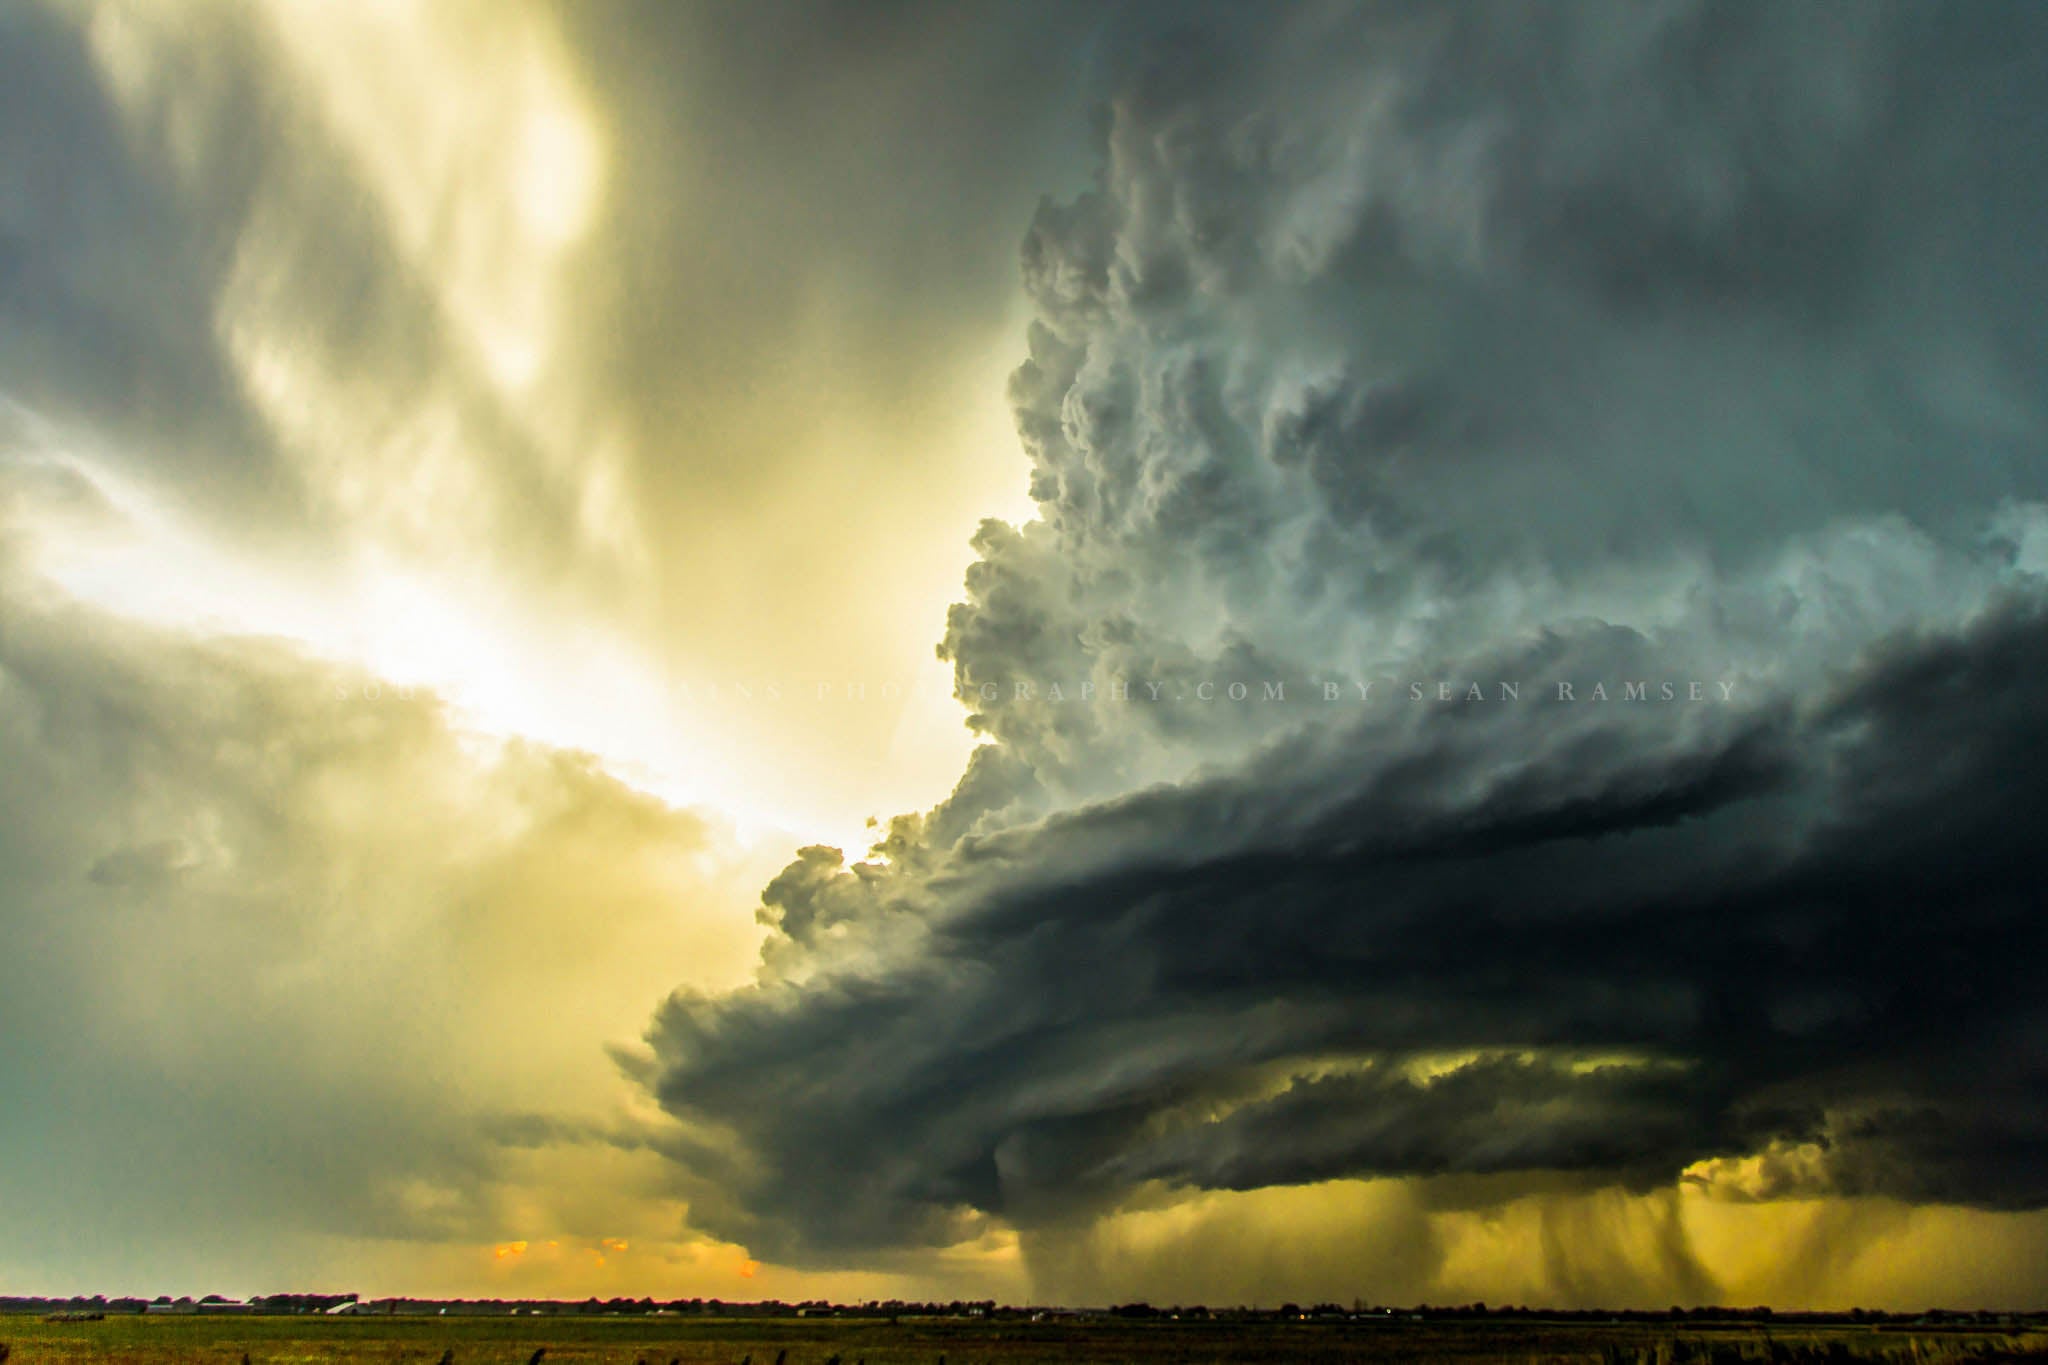 Storm photography print of an incredible supercell thunderstorm backlit by sunlight on a spring day in Oklahoma by Sean Ramsey of Southern Plains Photography.